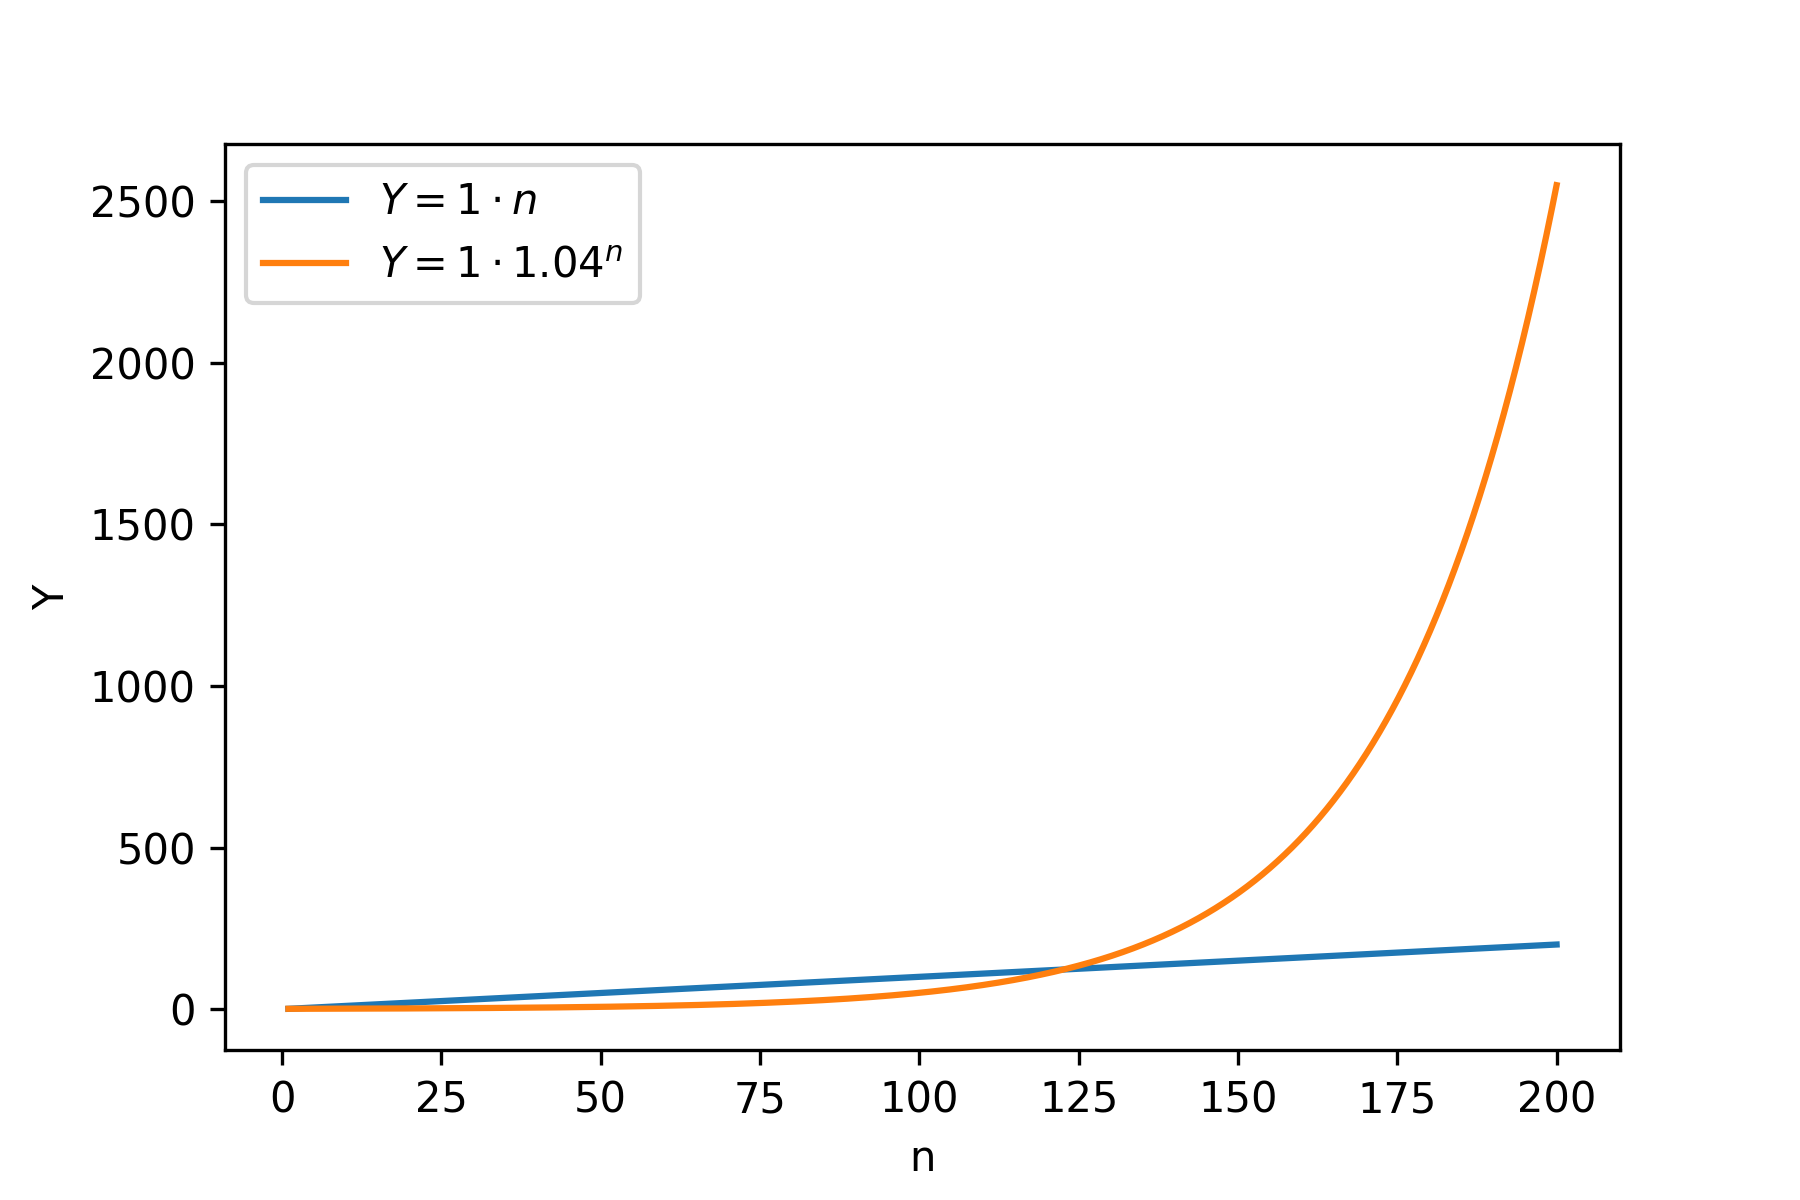 A plot showing how monthly FIRE income depends on time assuming linear and compounding growth.
This time we look from 1 to 200 on x axis and compounding sky-rockets.